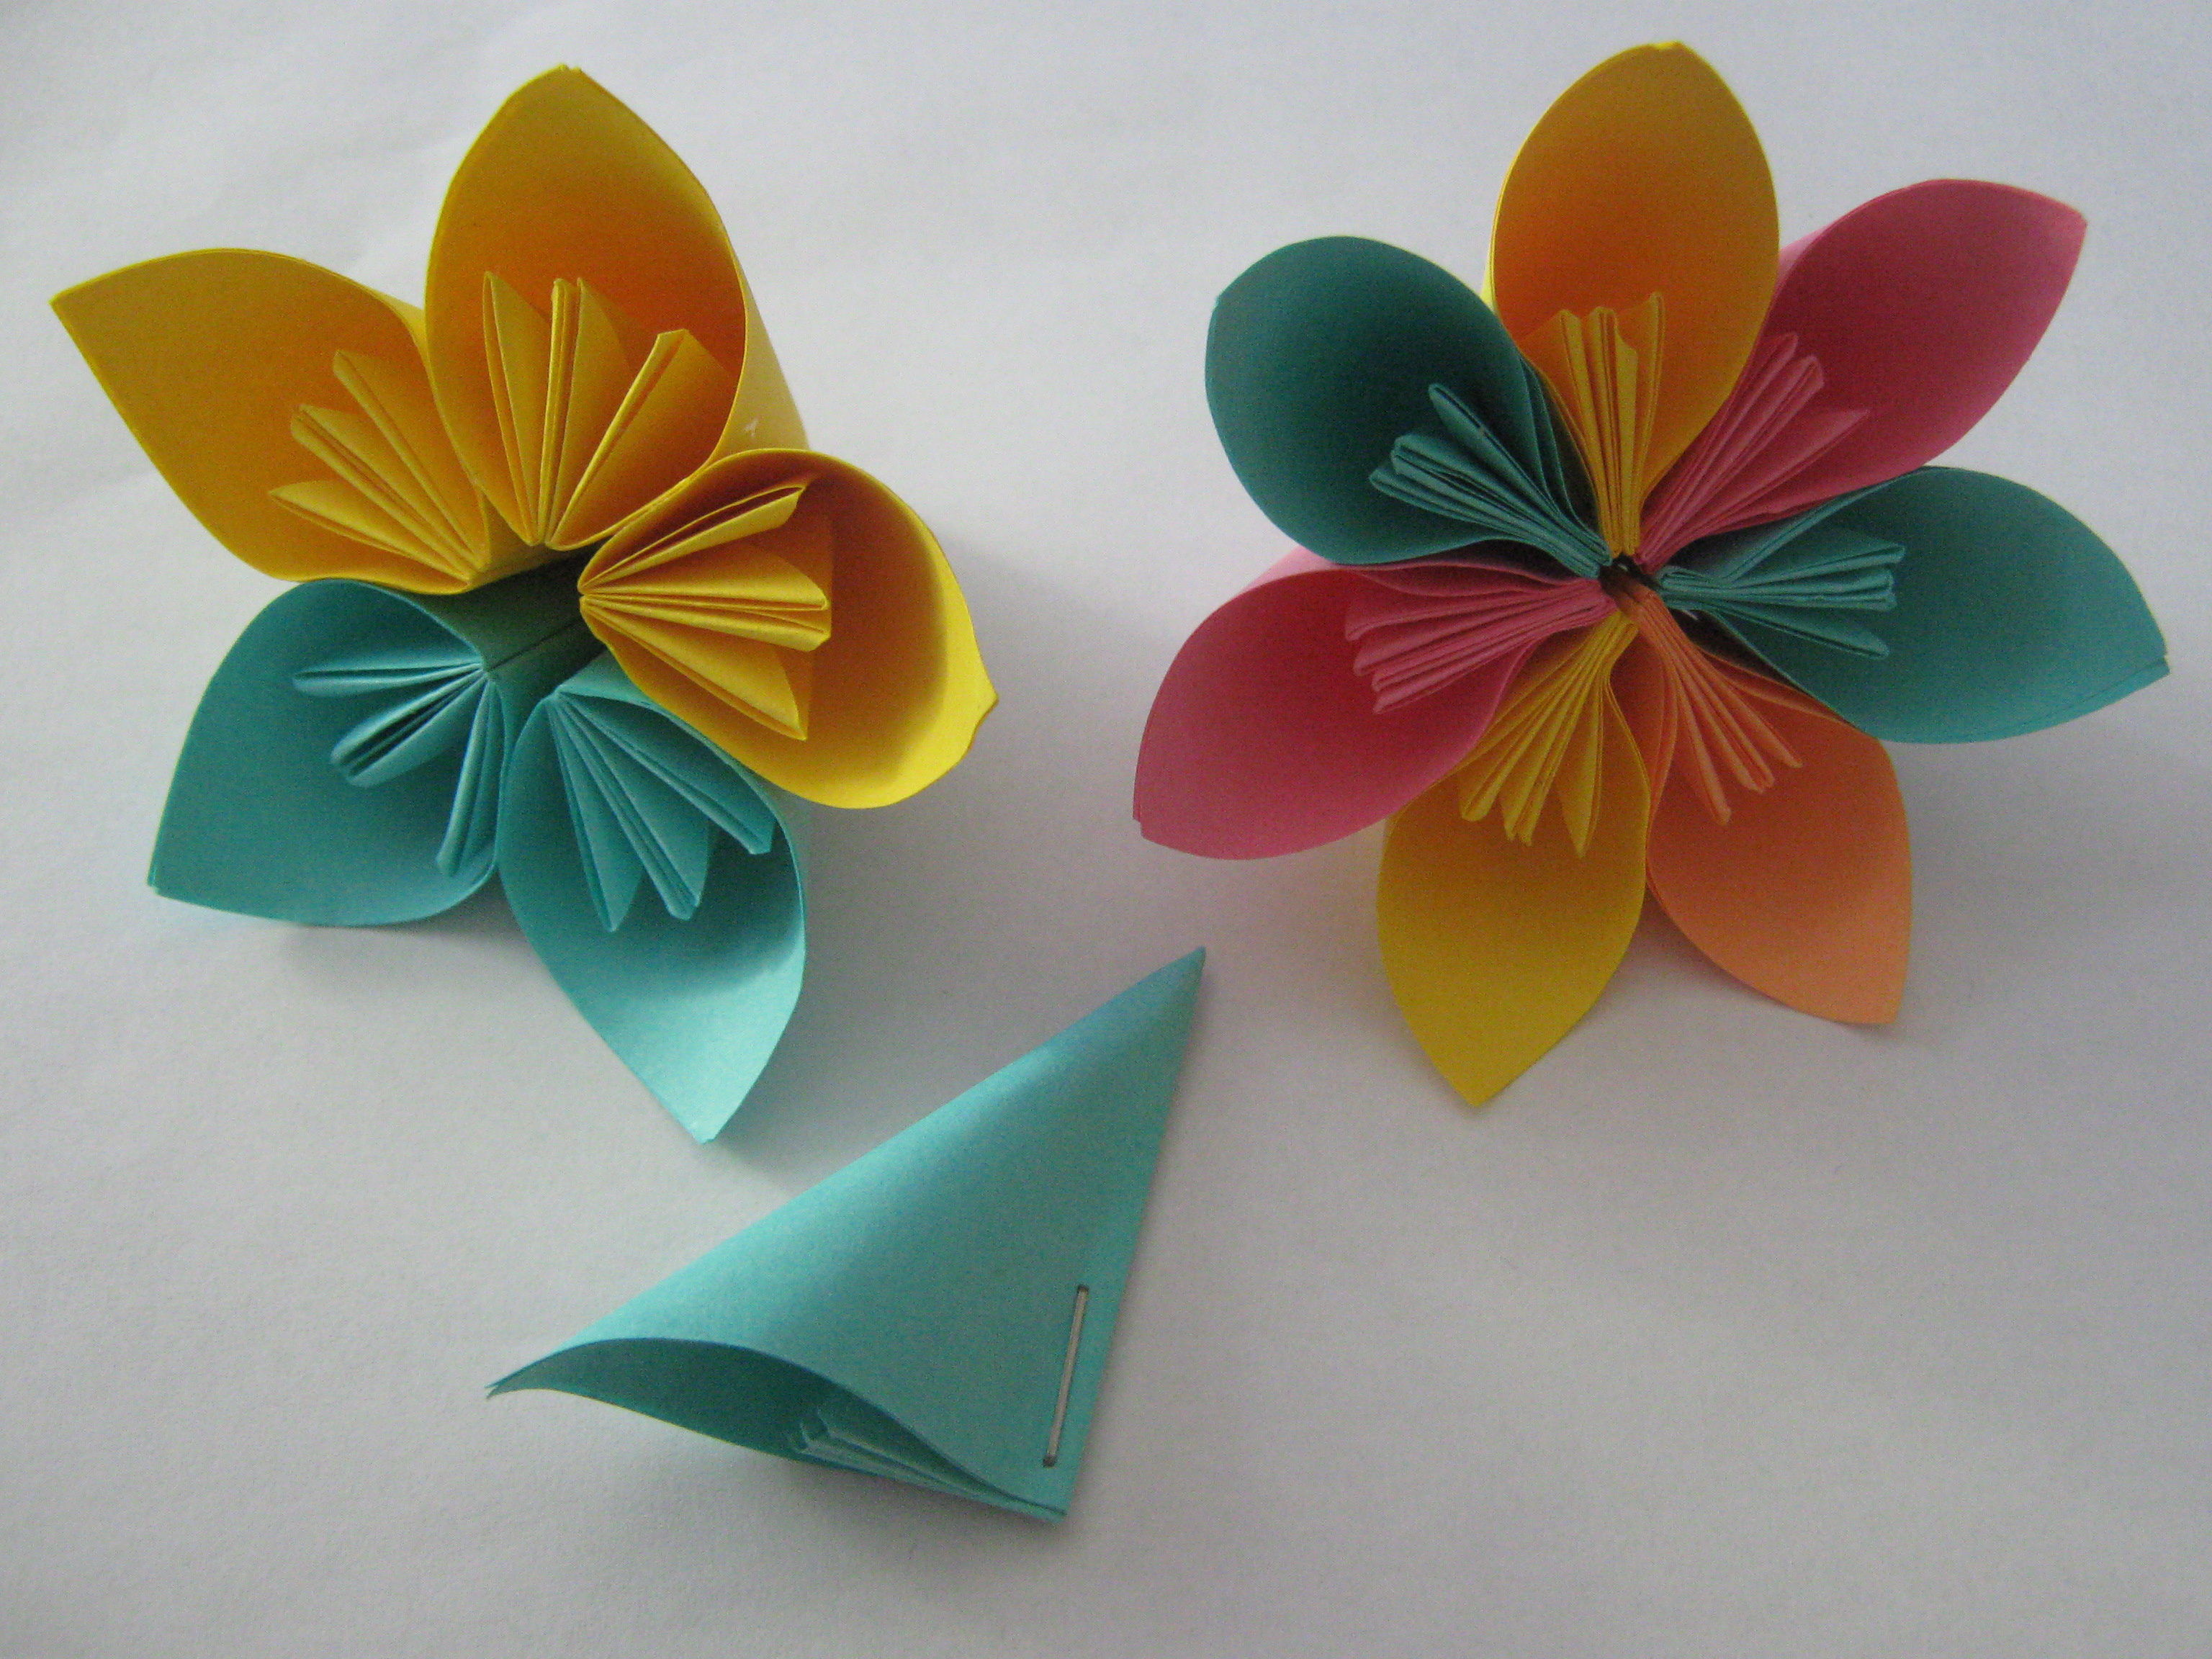 How To Make Flower Paper Origami Origami Flower Tutorial Learn 2 Origami Origami Paper Craft